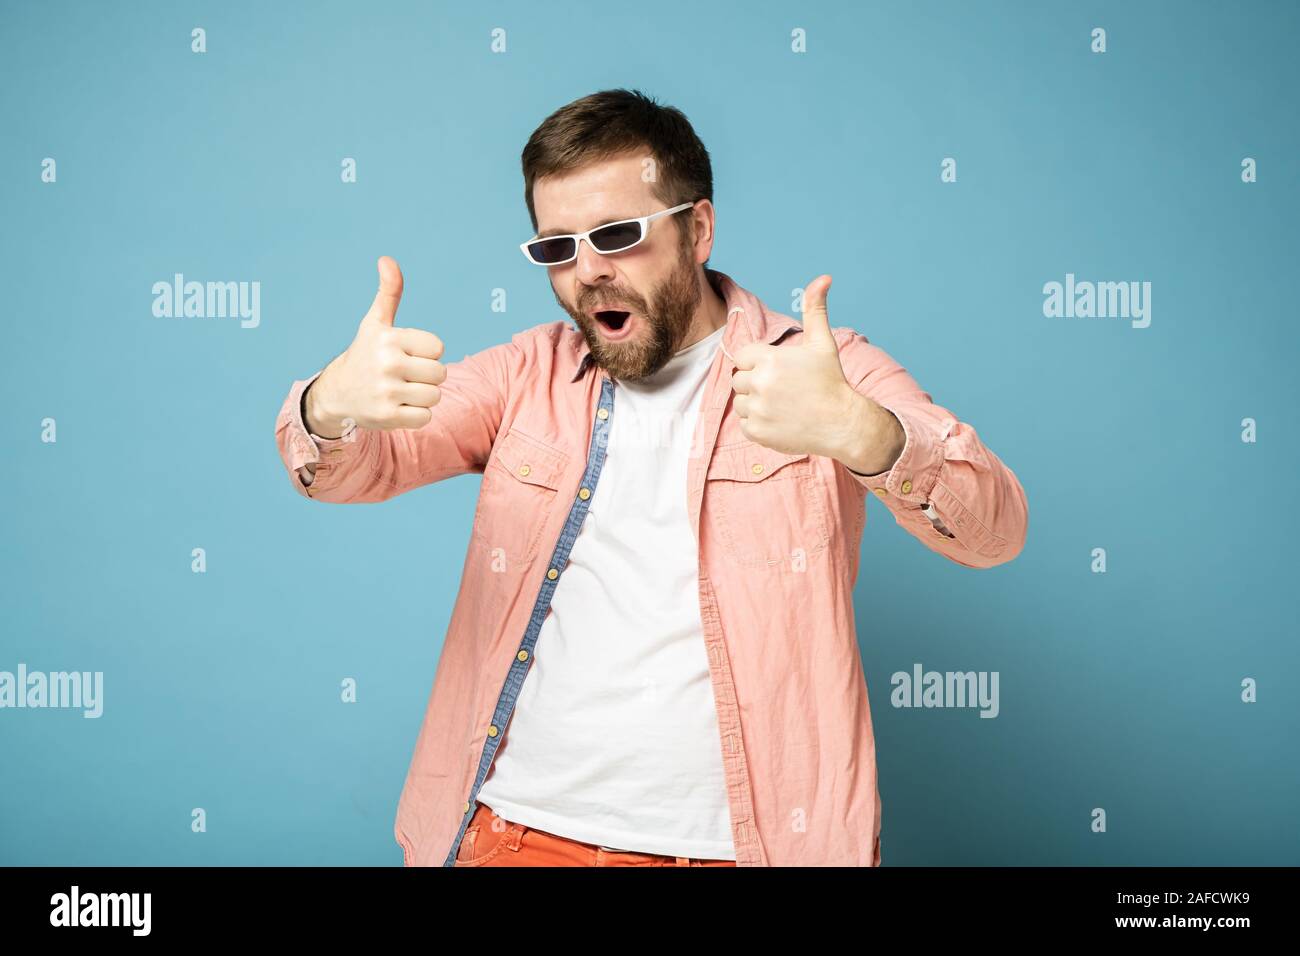 Strange, bearded man in sunglasses gestures show thumbs up on two hands, opens mouth and makes a weird expression on face. Stock Photo